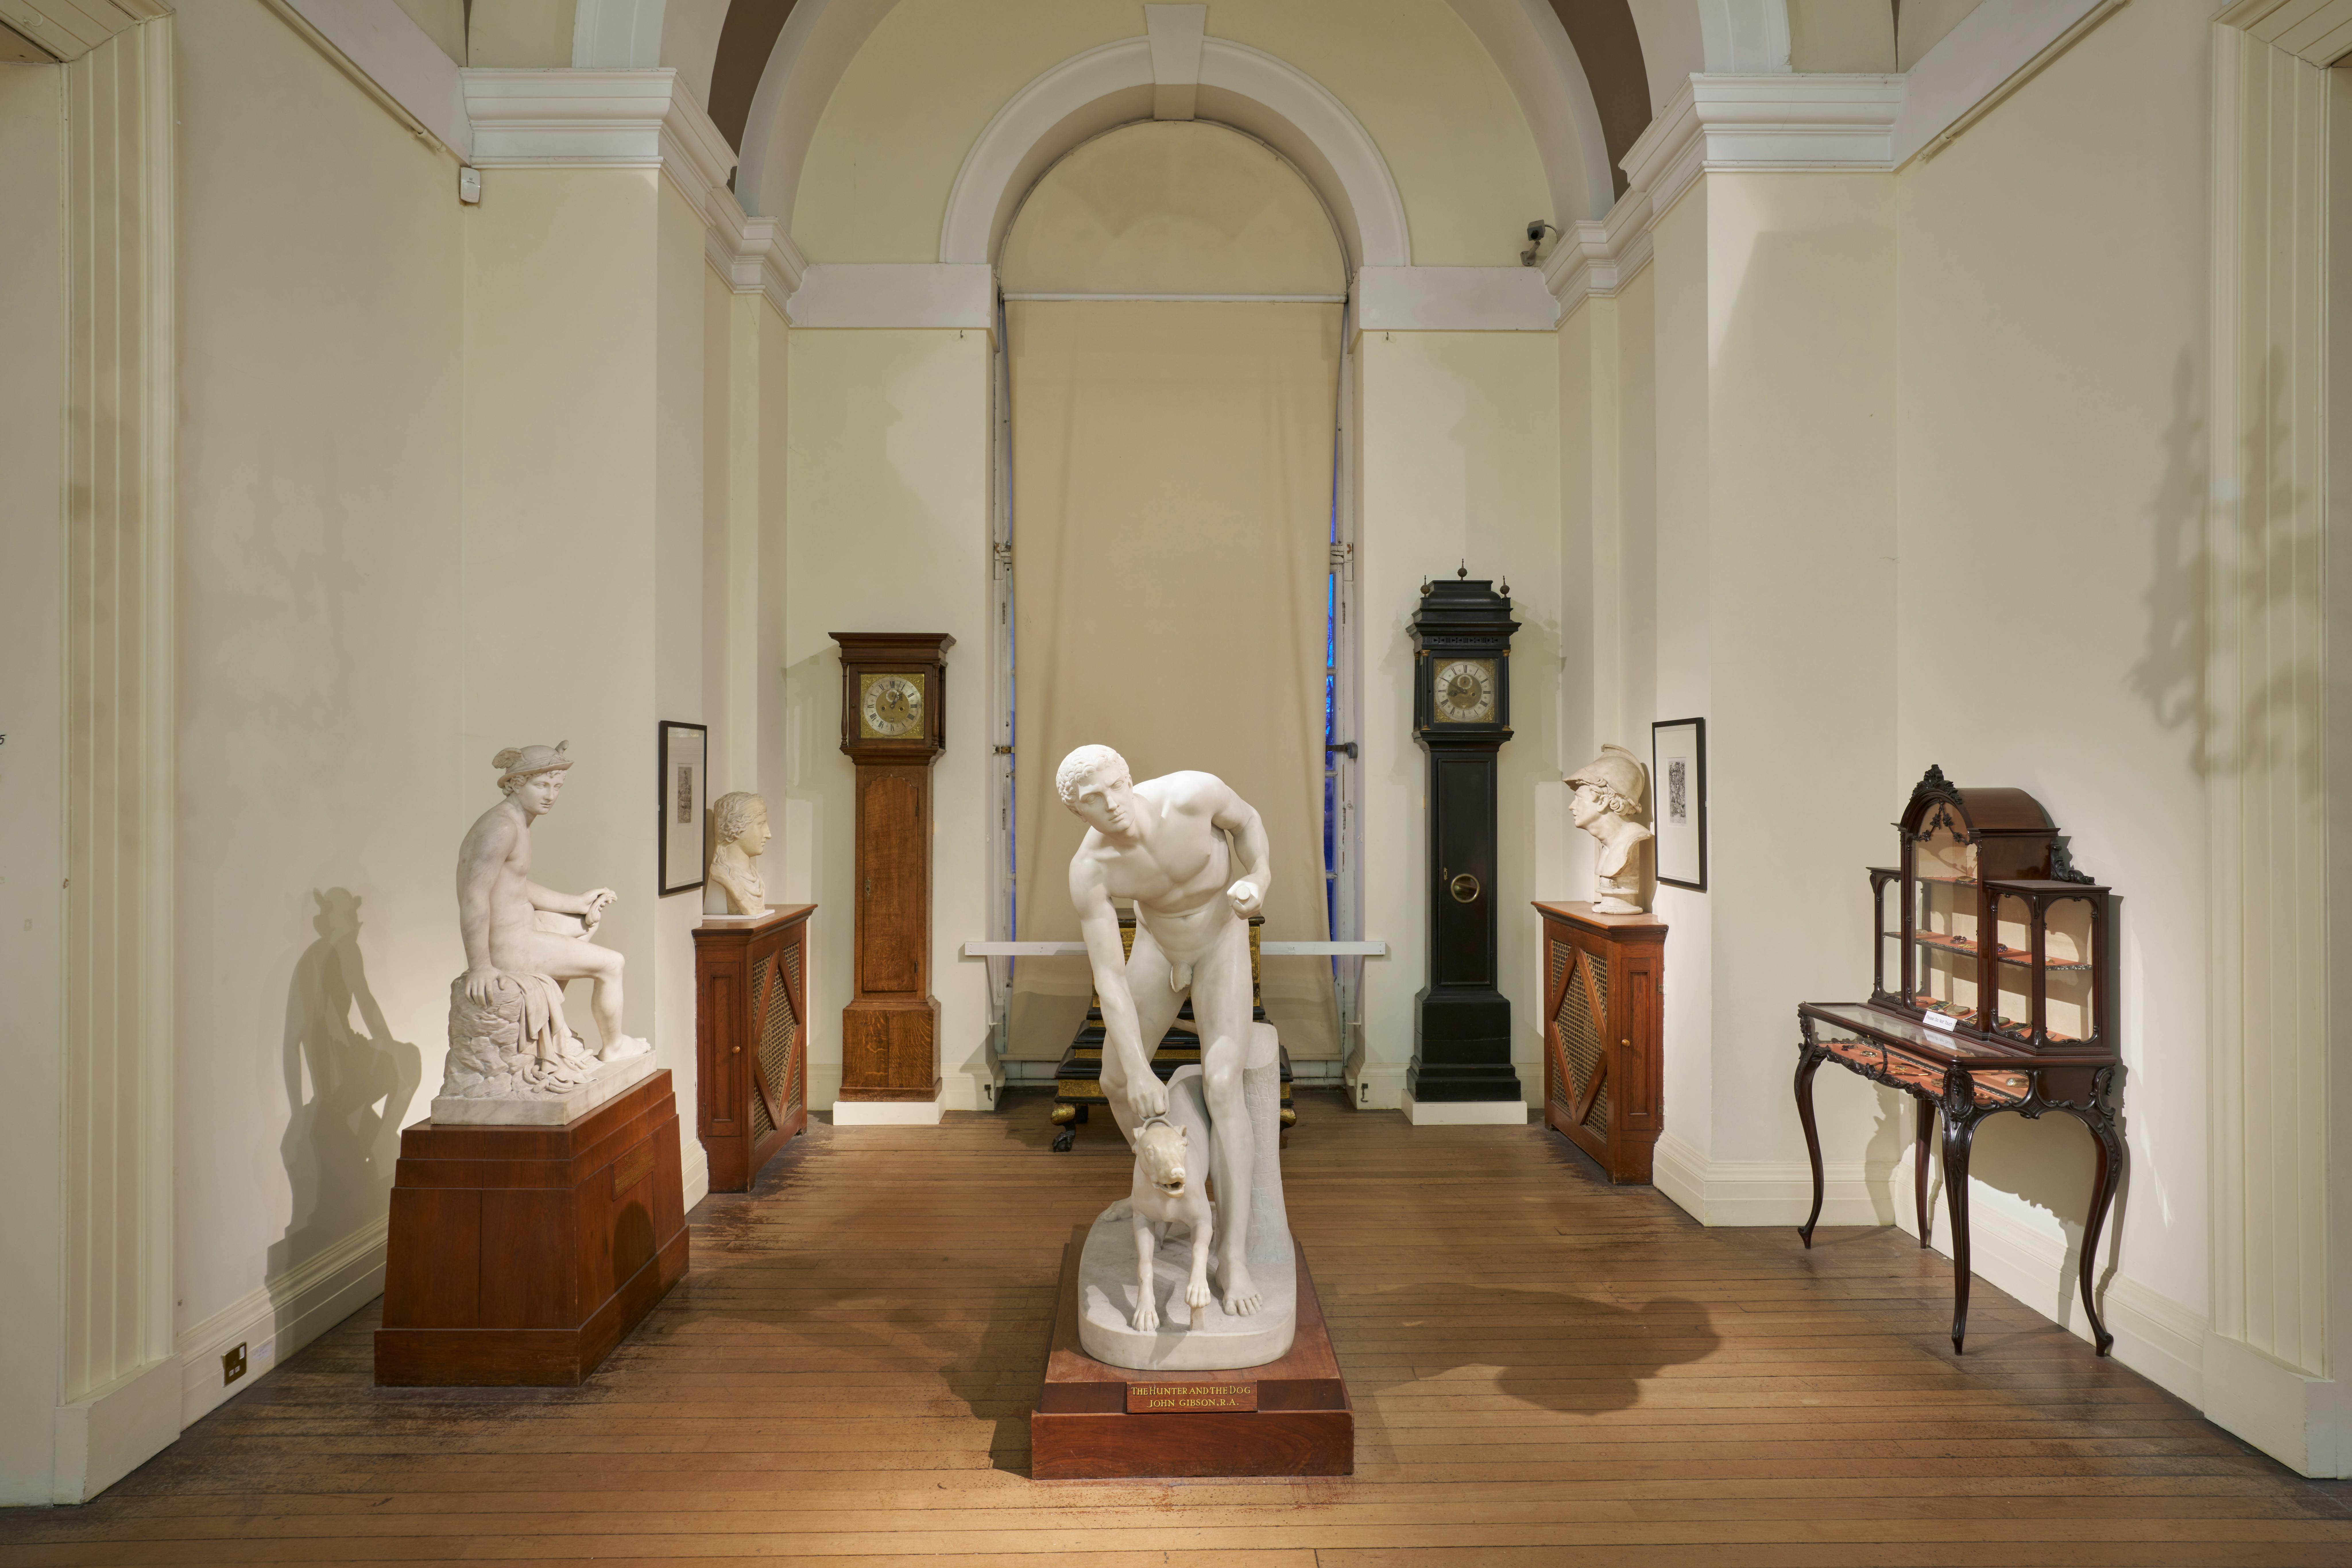 An image of inside the Usher Gallery and some of the statues